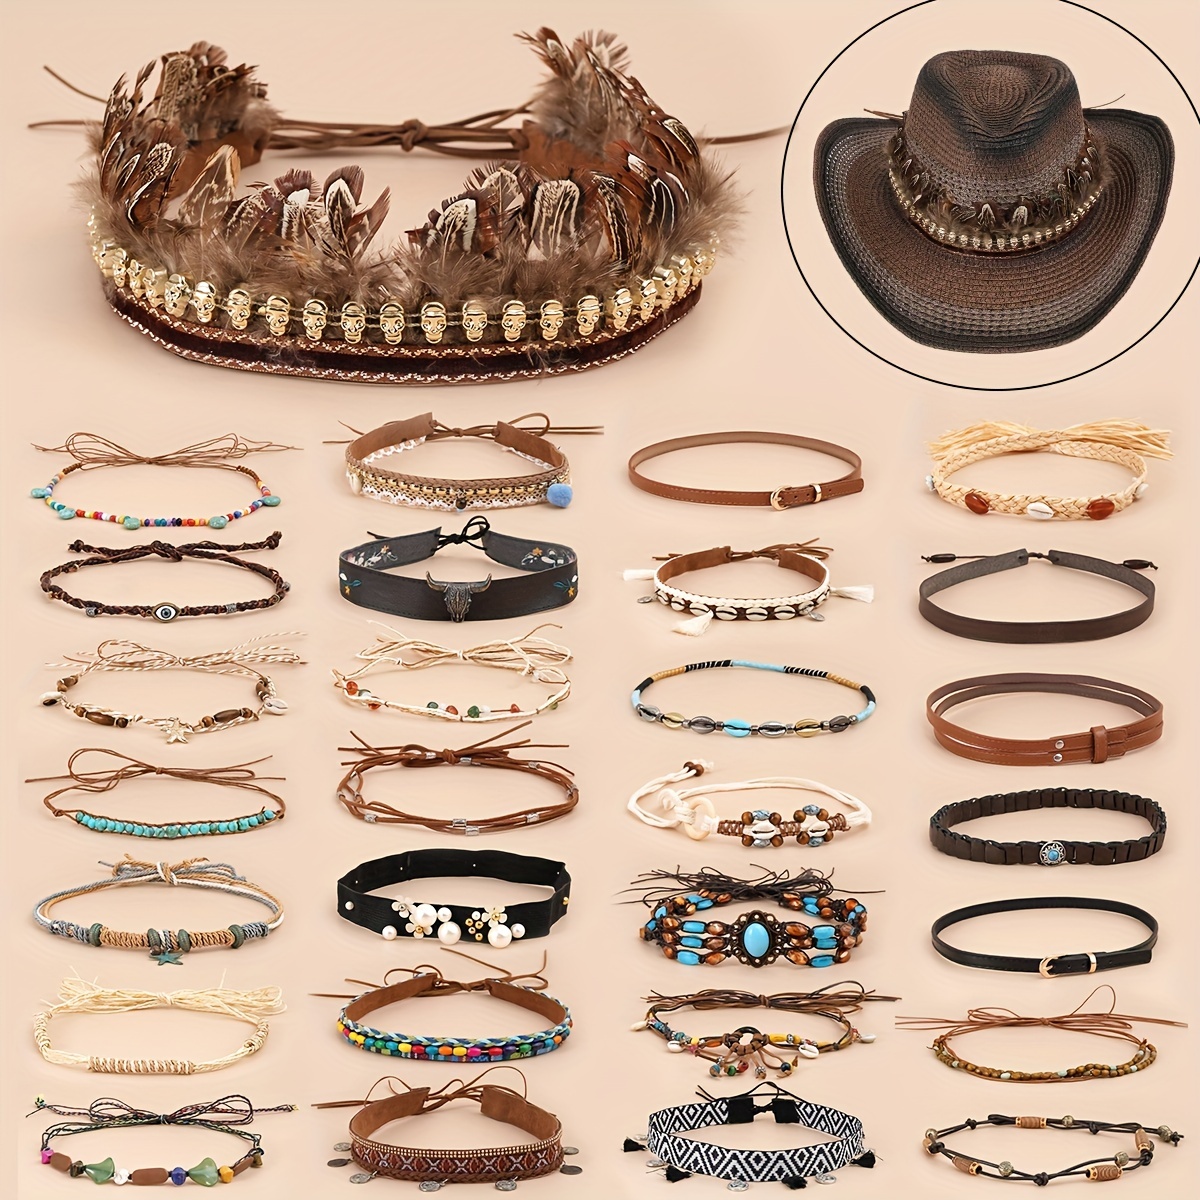 Hat Feathers 12Pcs, Assorted Natural Feather Packs Accessories for